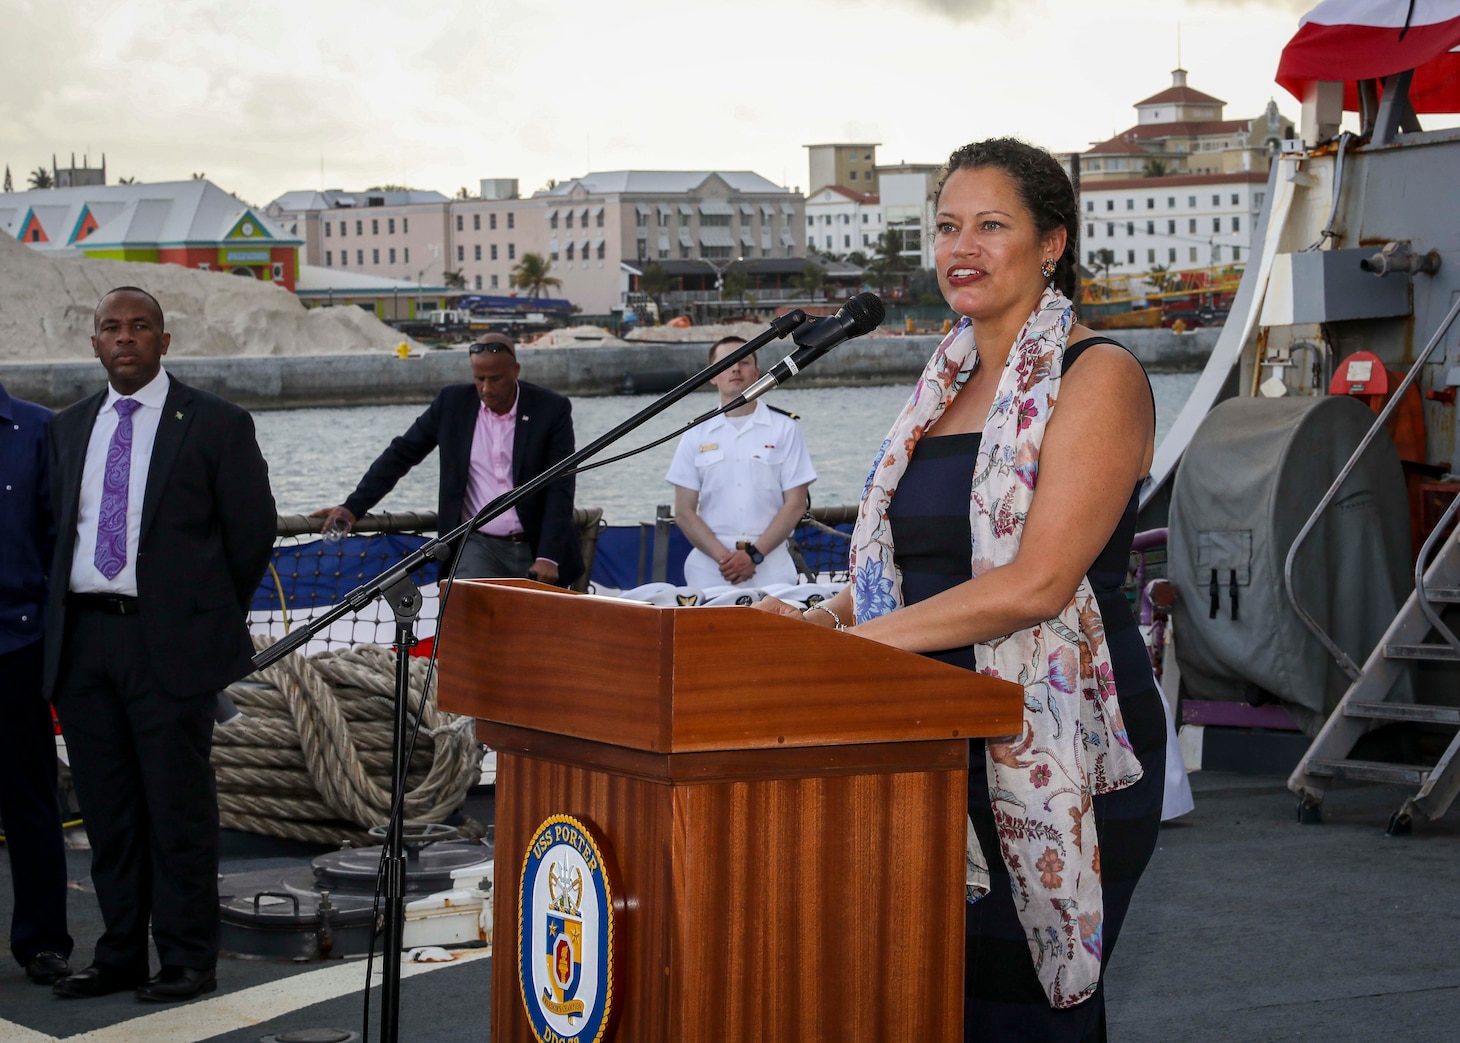 NASSAU, The Bahamas (April 3, 2022) – Ms. Usha Pitts, the Charge d'Affaires of the U.S. Embassy Nassau, gives her opening remarks during a reception held on the flight deck of the Arleigh Burke-class guided-missile destroyer USS Porter (DDG 78), April 3. Porter, forward-deployed to Rota, Spain, is currently in the U.S. 2nd Fleet area of operations to conduct routine certifications and training. (U.S. Navy photo by Mass Communication Specialist 1st Class Eric Coffer/Released)